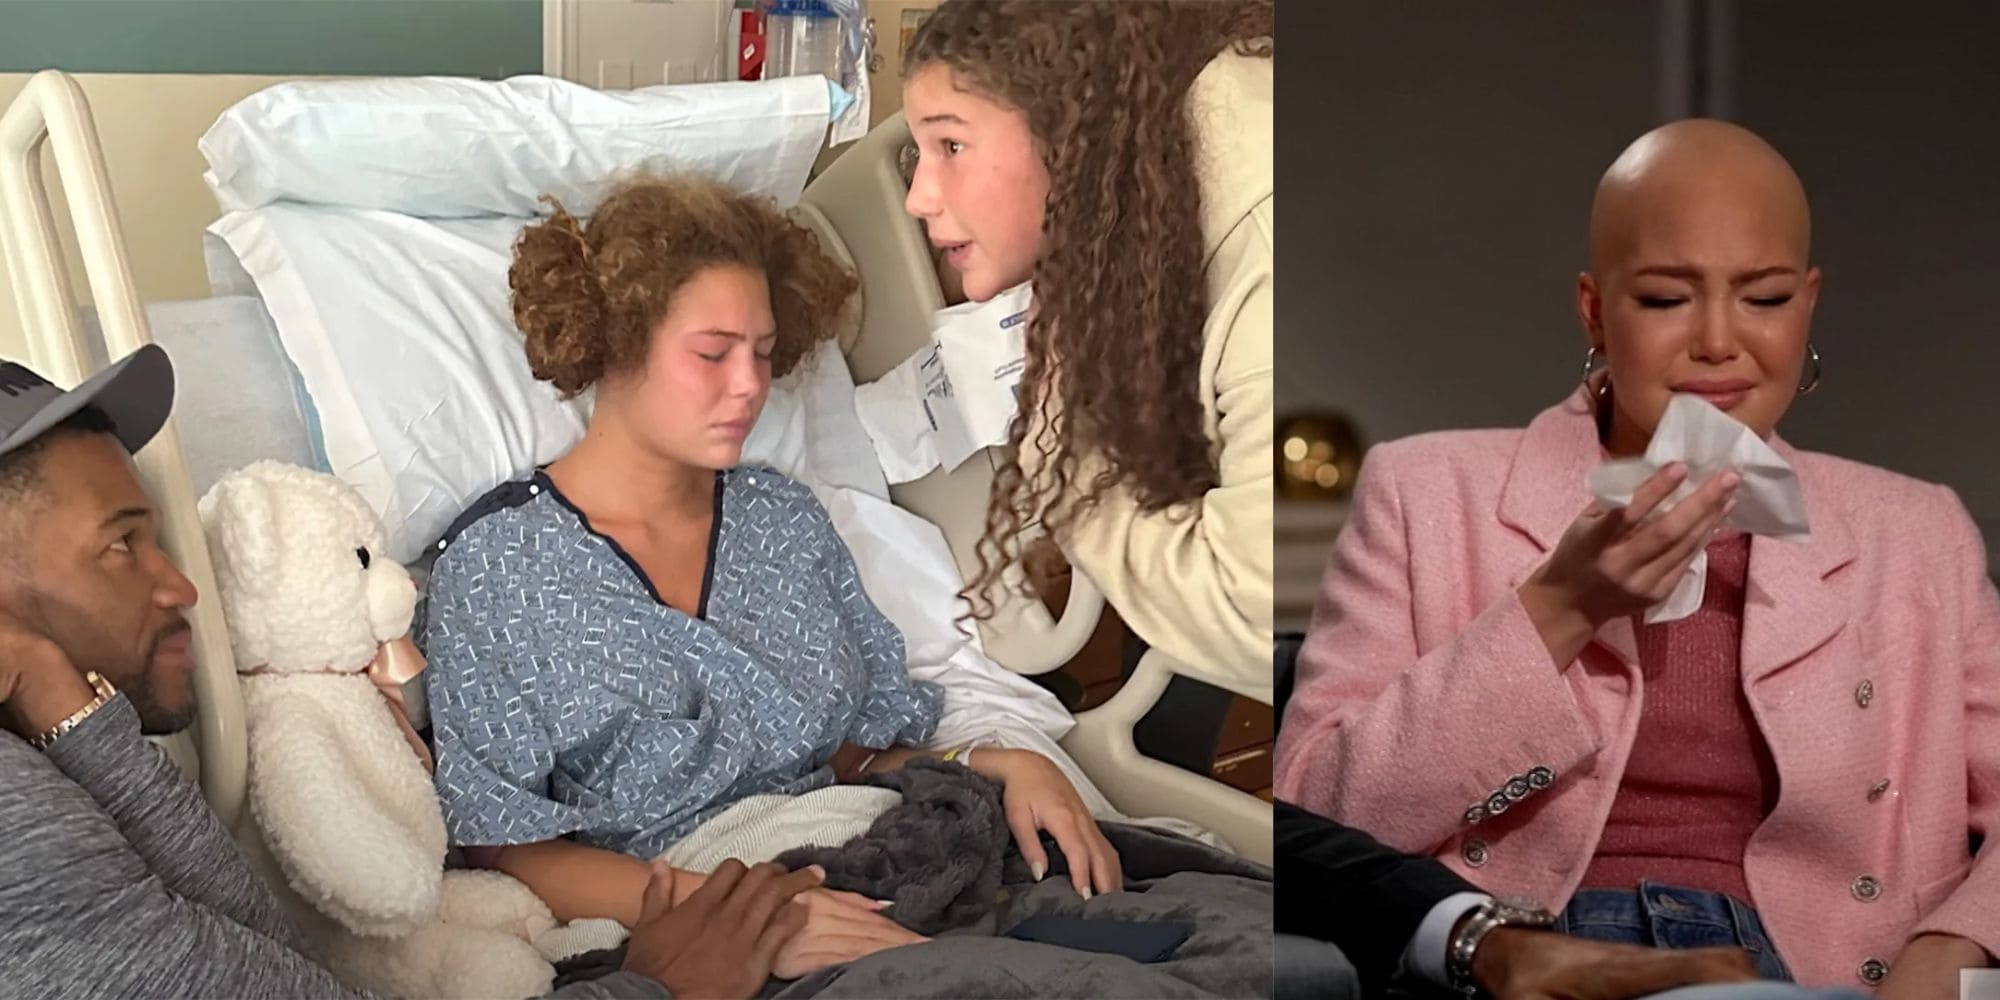 Michael Strahan's 19-year-old Daughter Isabella Shares Her Brain Tumor Diagnosis: 'Just Have to Keep Living Every Day'